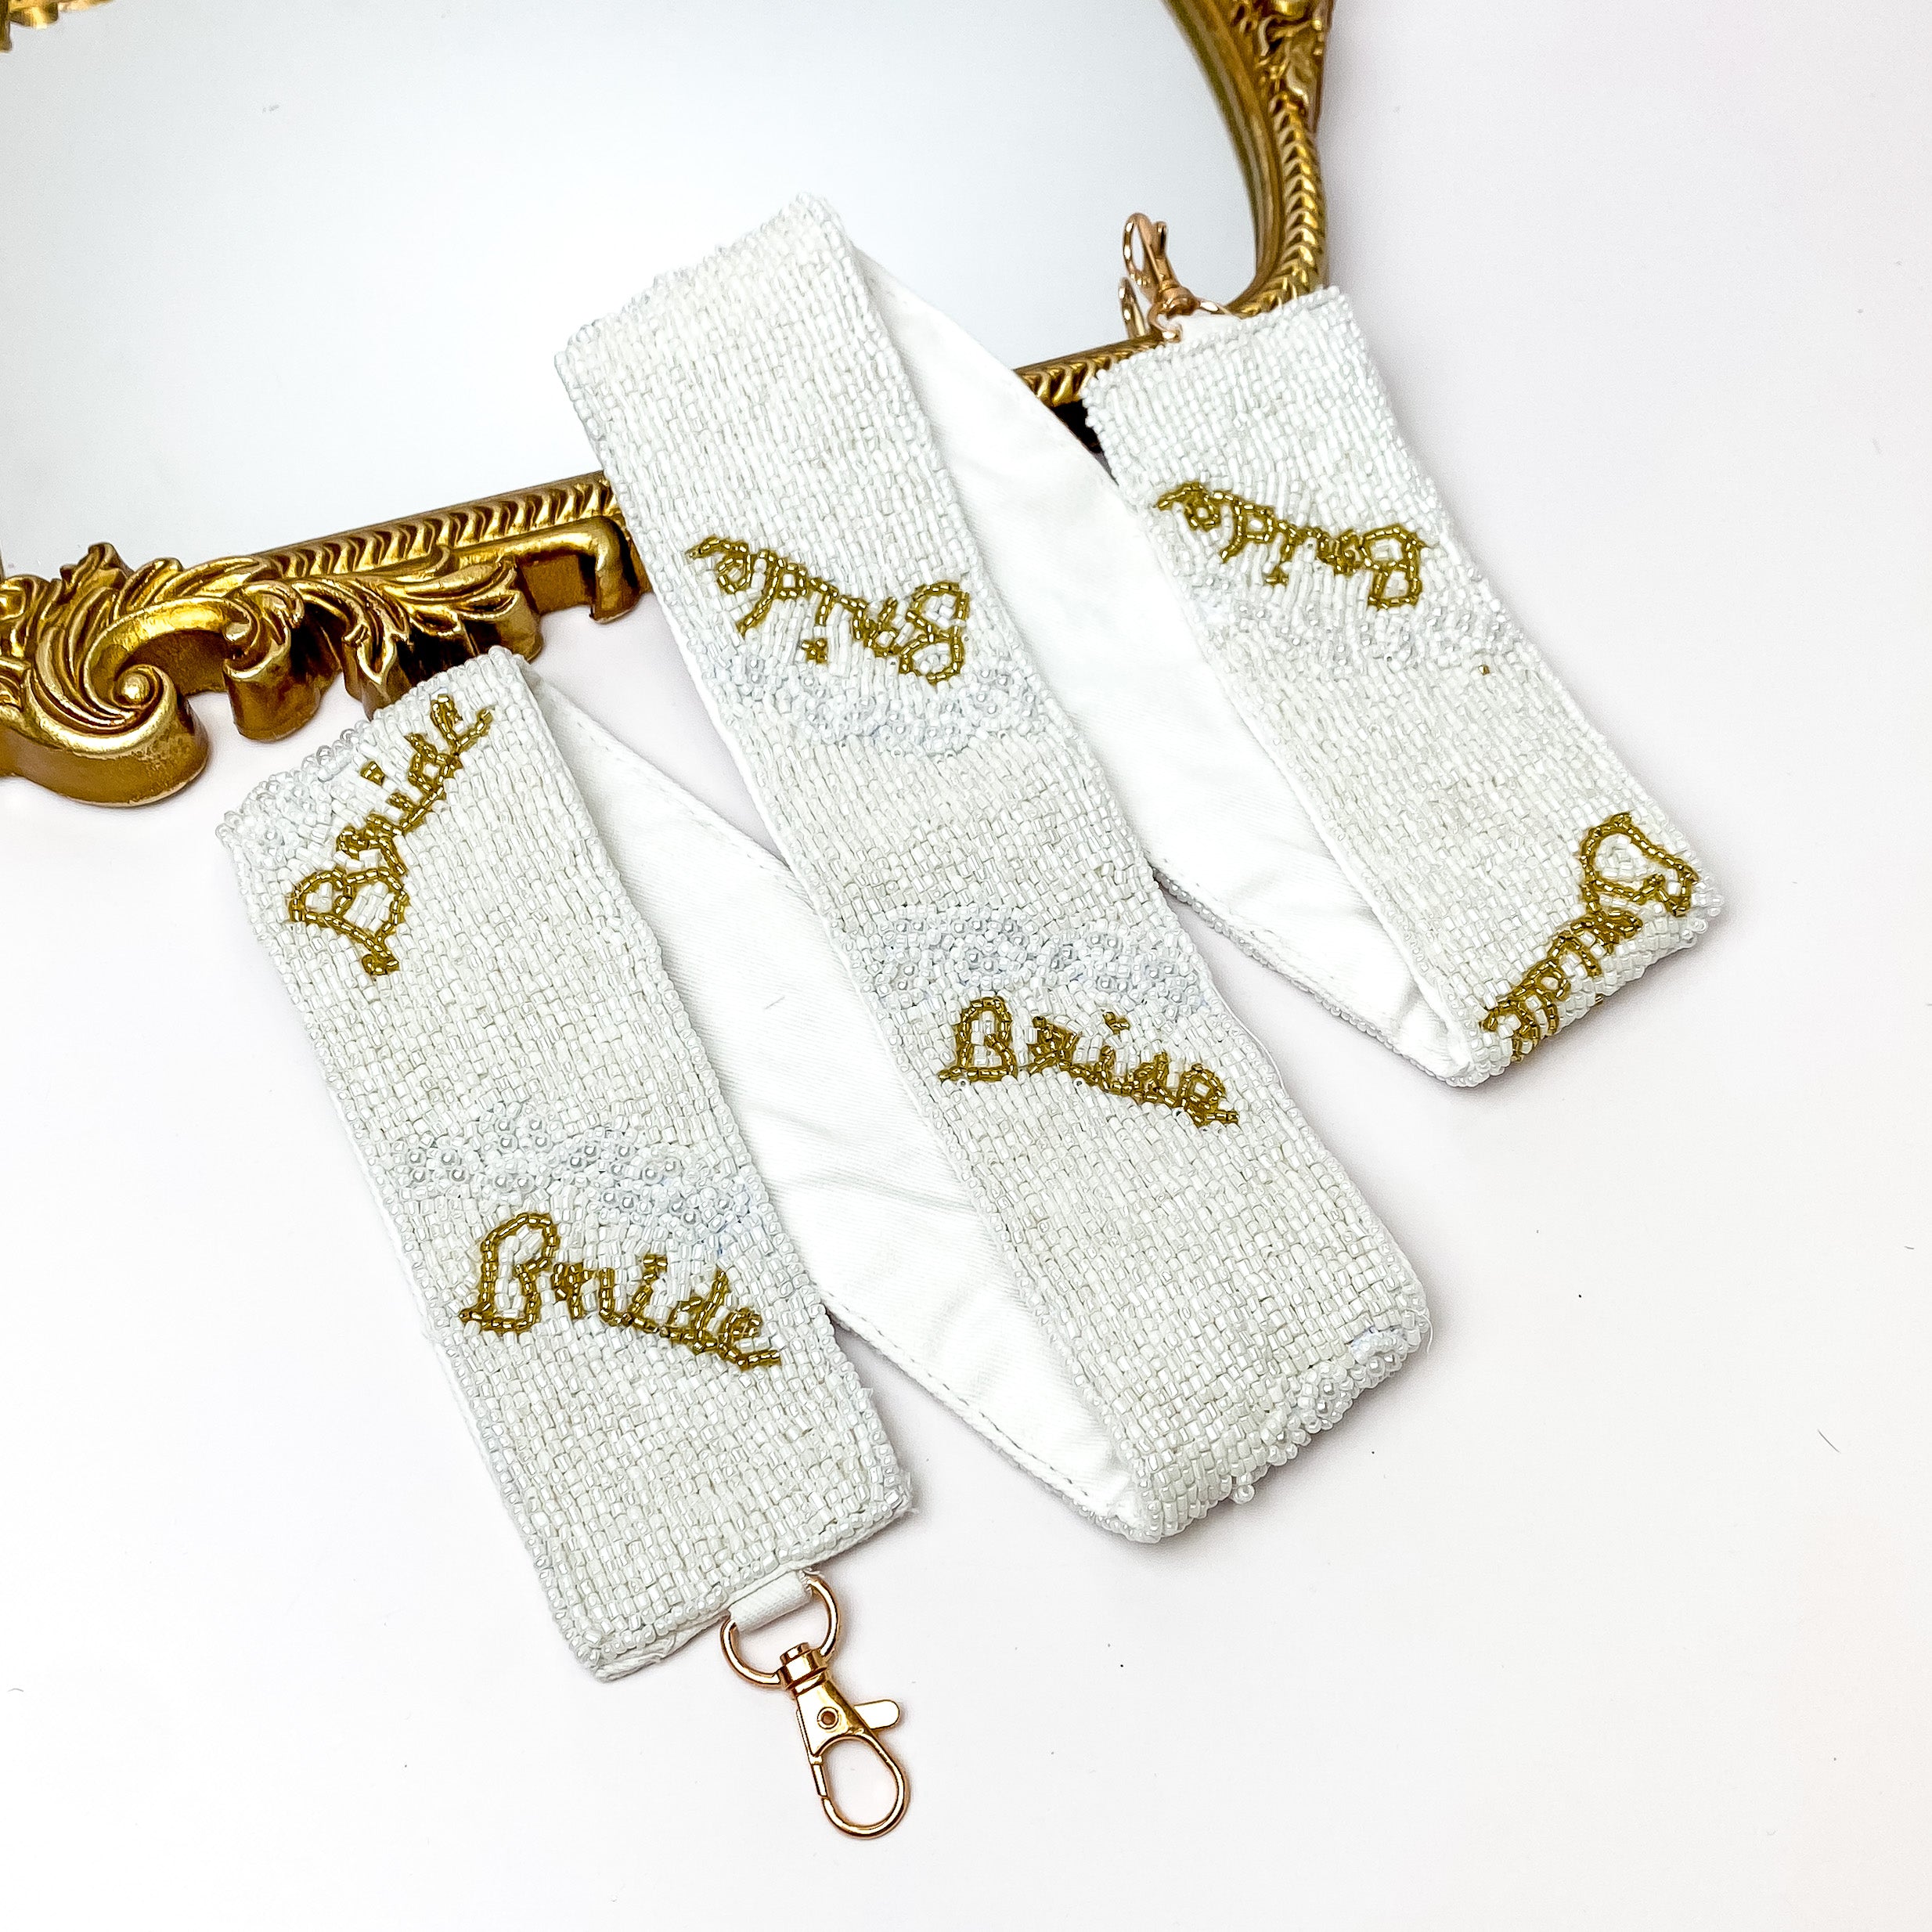 White beaded purse strap with gold hardware and the word "Bride" in gold beads. This purse strap is pictured partially laying on a gold mirror on a white background. 